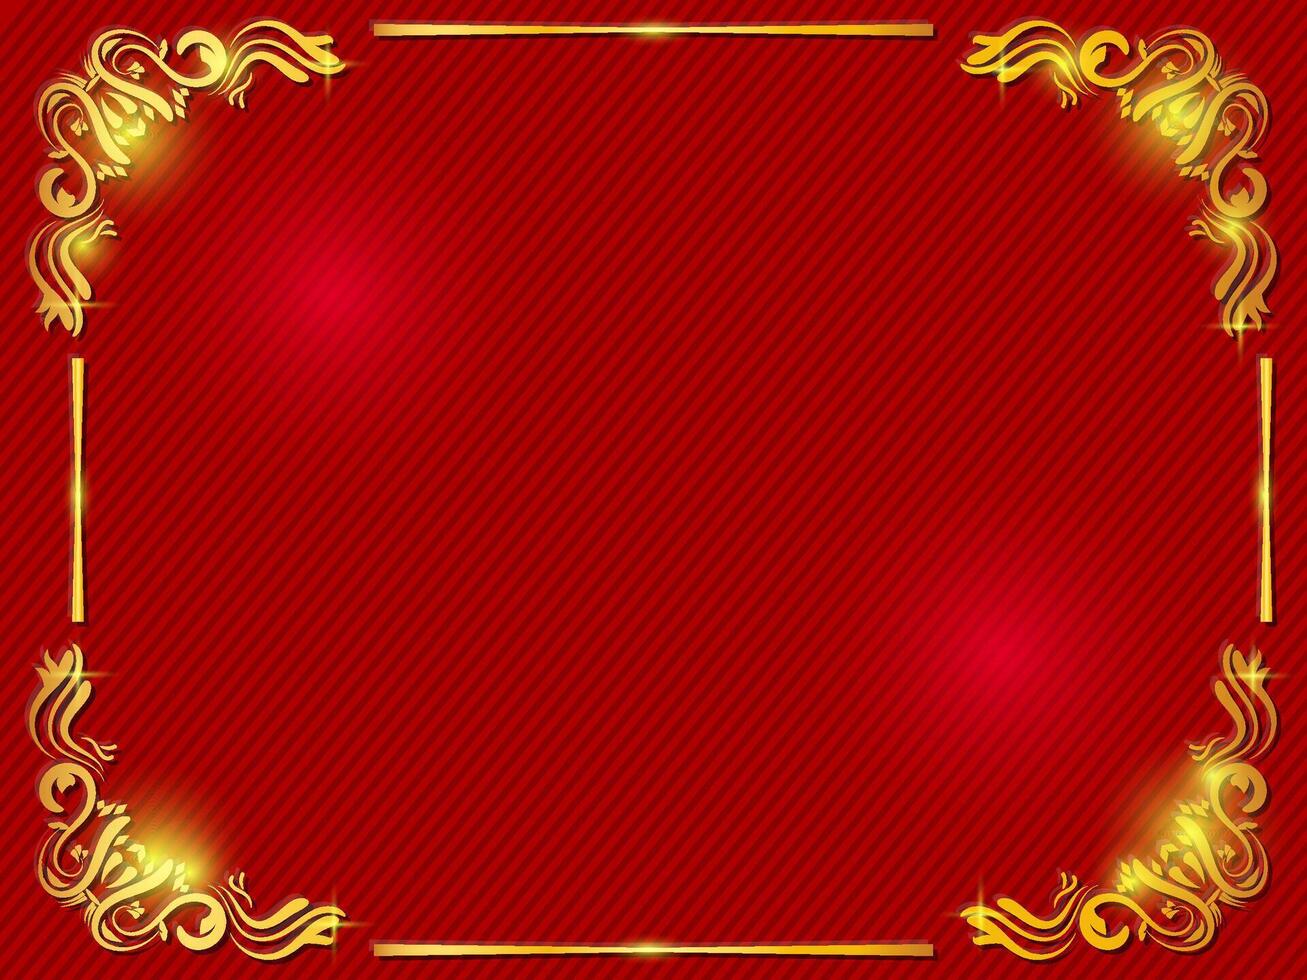 Gold floral of Decorative vintage frames with red background vector